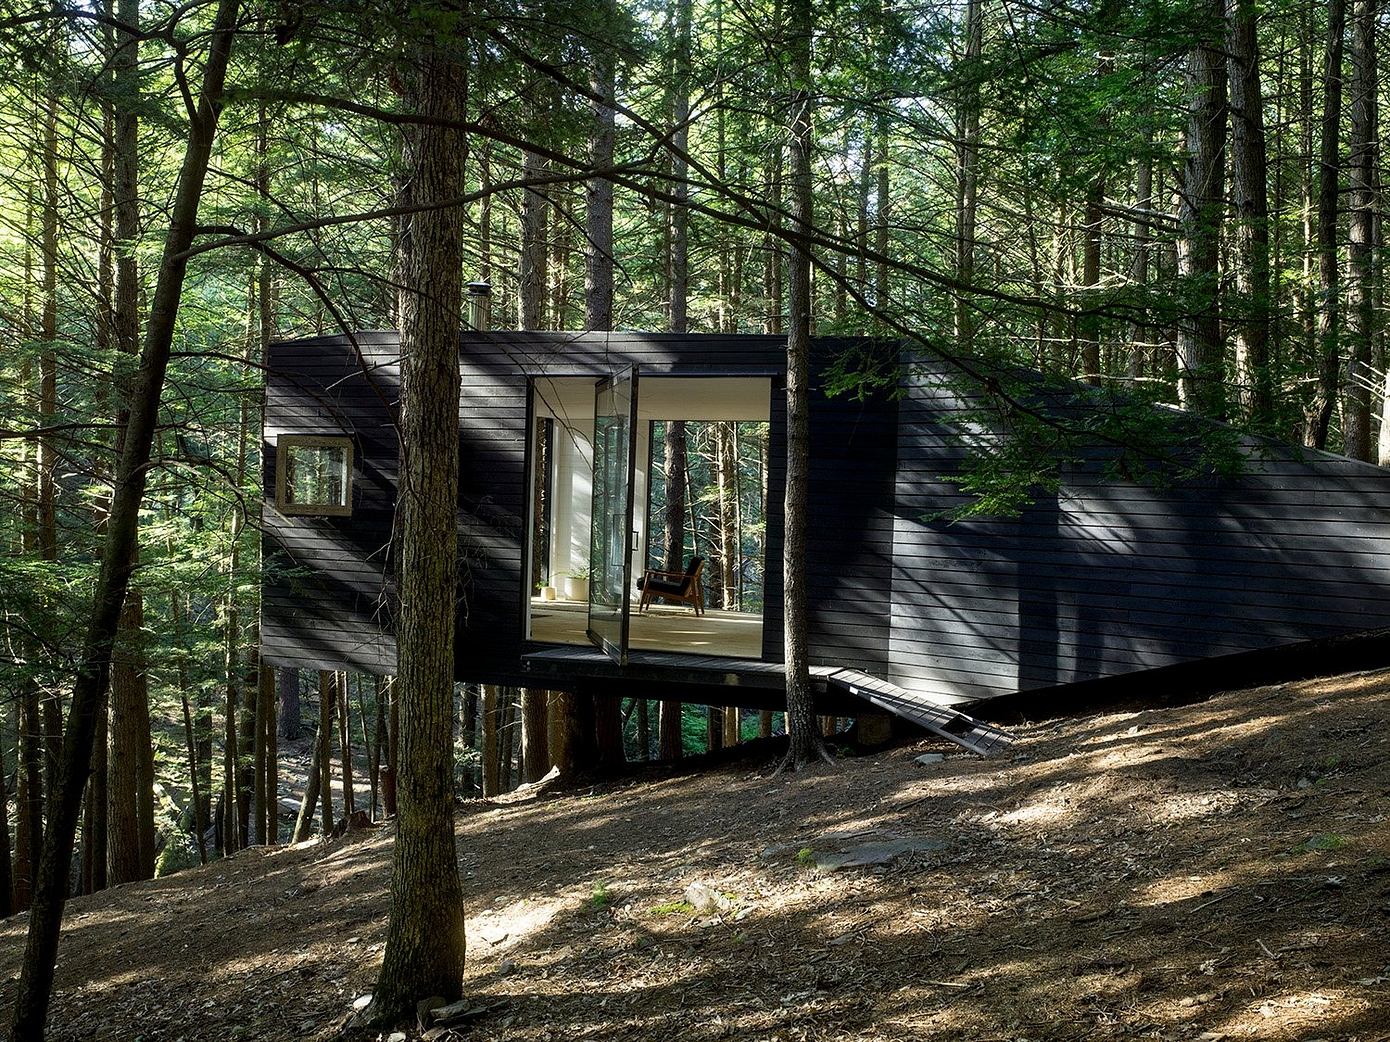 Half-Tree House: Unique Cabin Built Among Trees